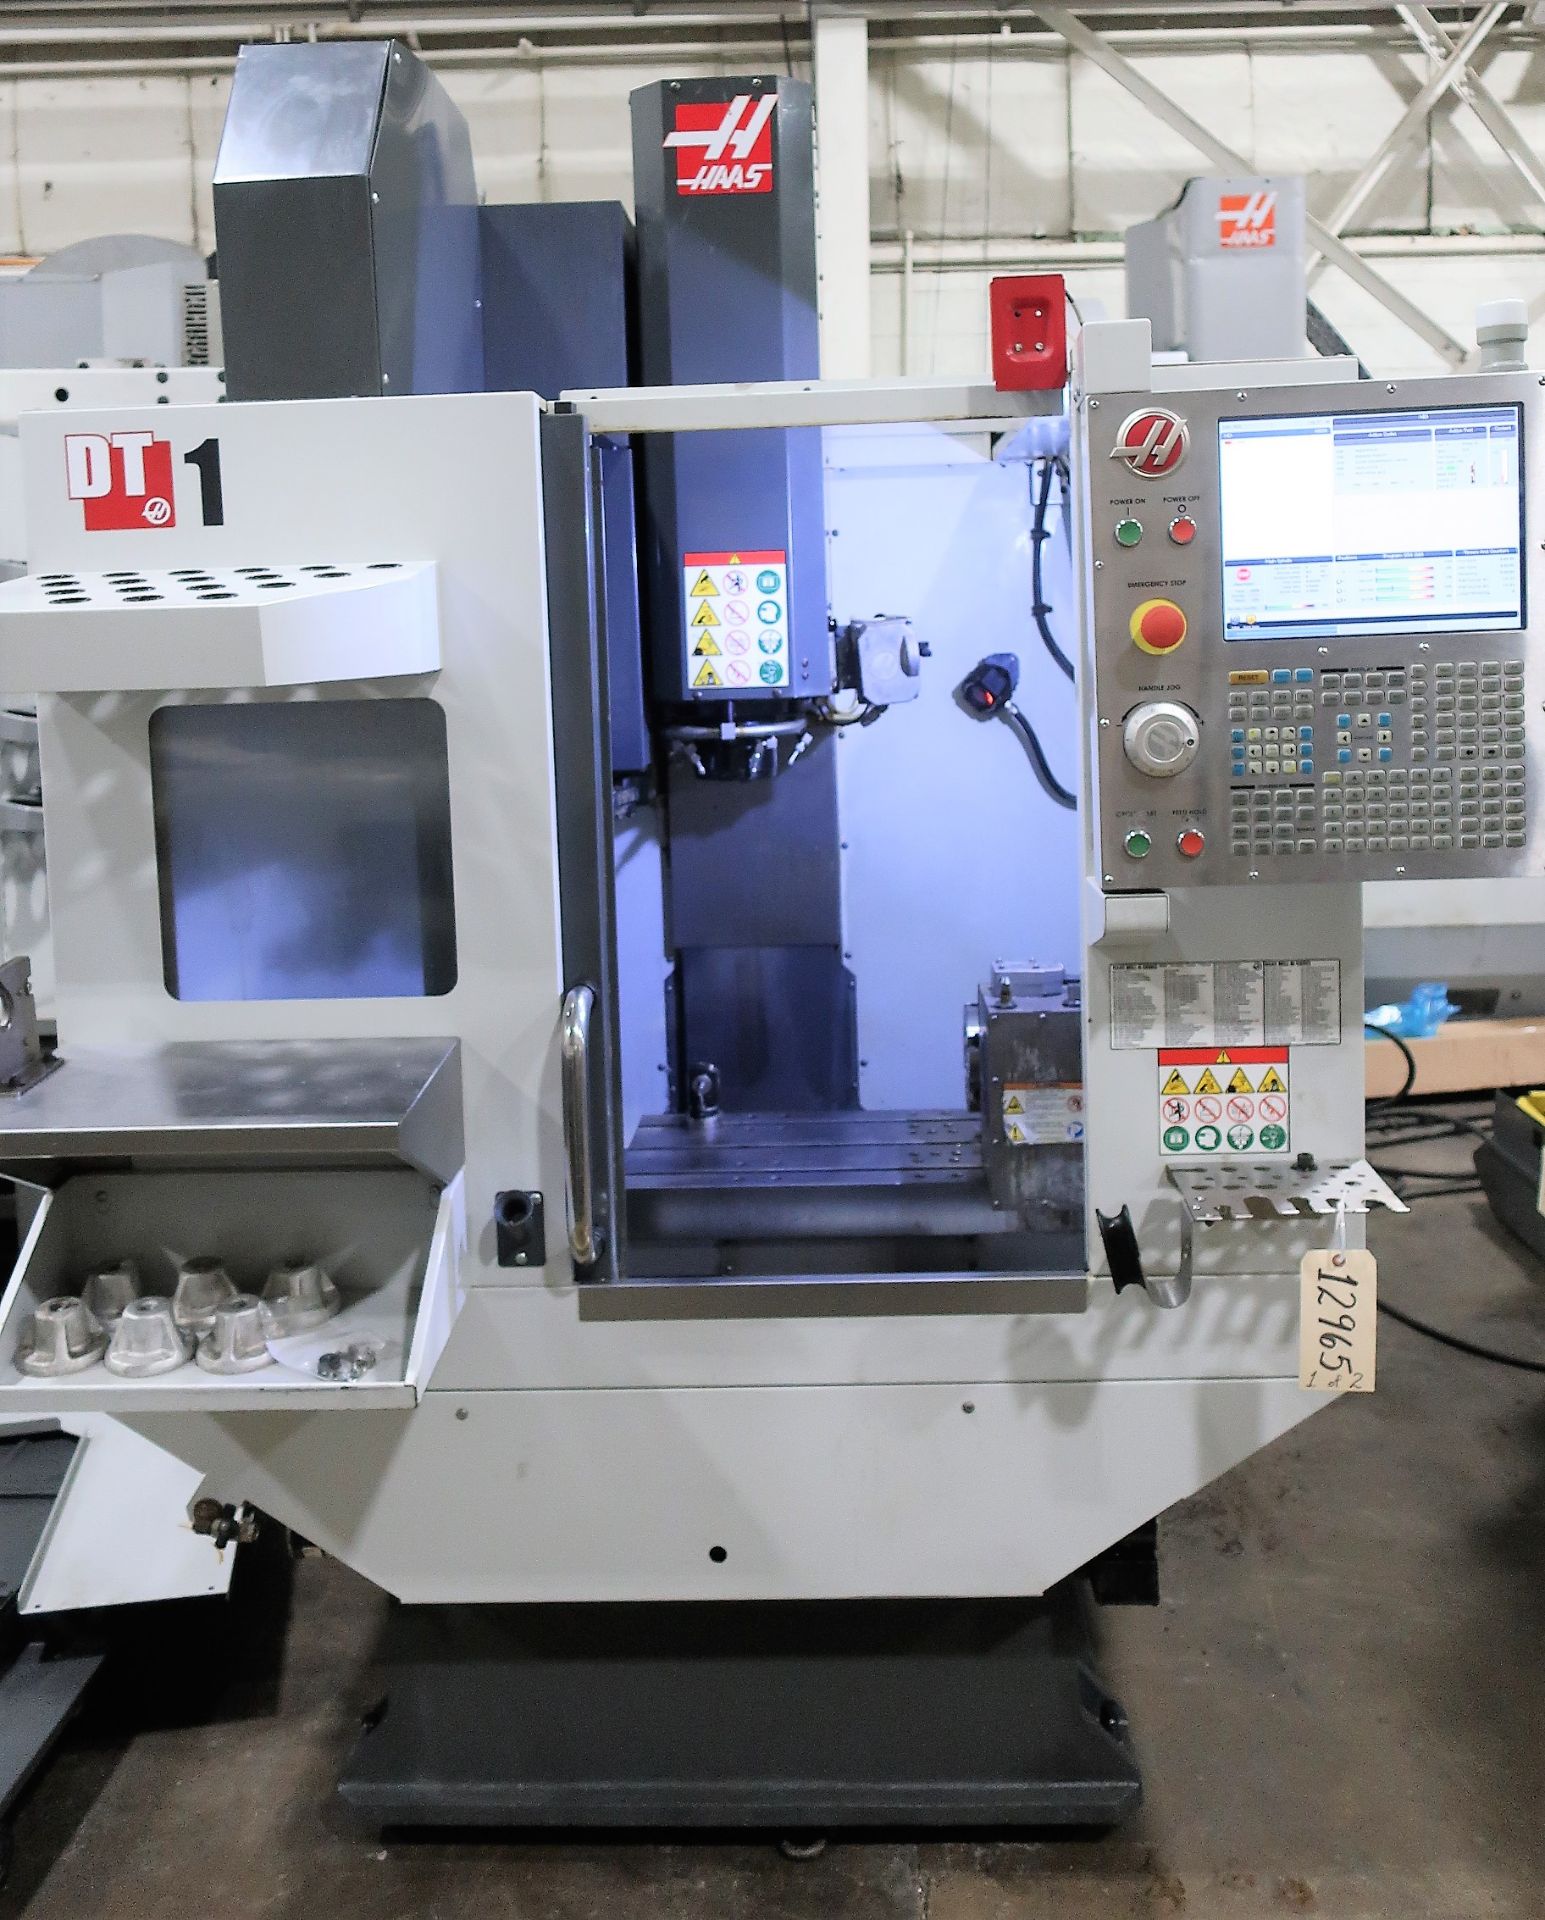 HAAS DT-1 4-AXIS CNC DRILL/TAP VERTICAL MACHINING CENTER, S/N 1131126, NEW 2016